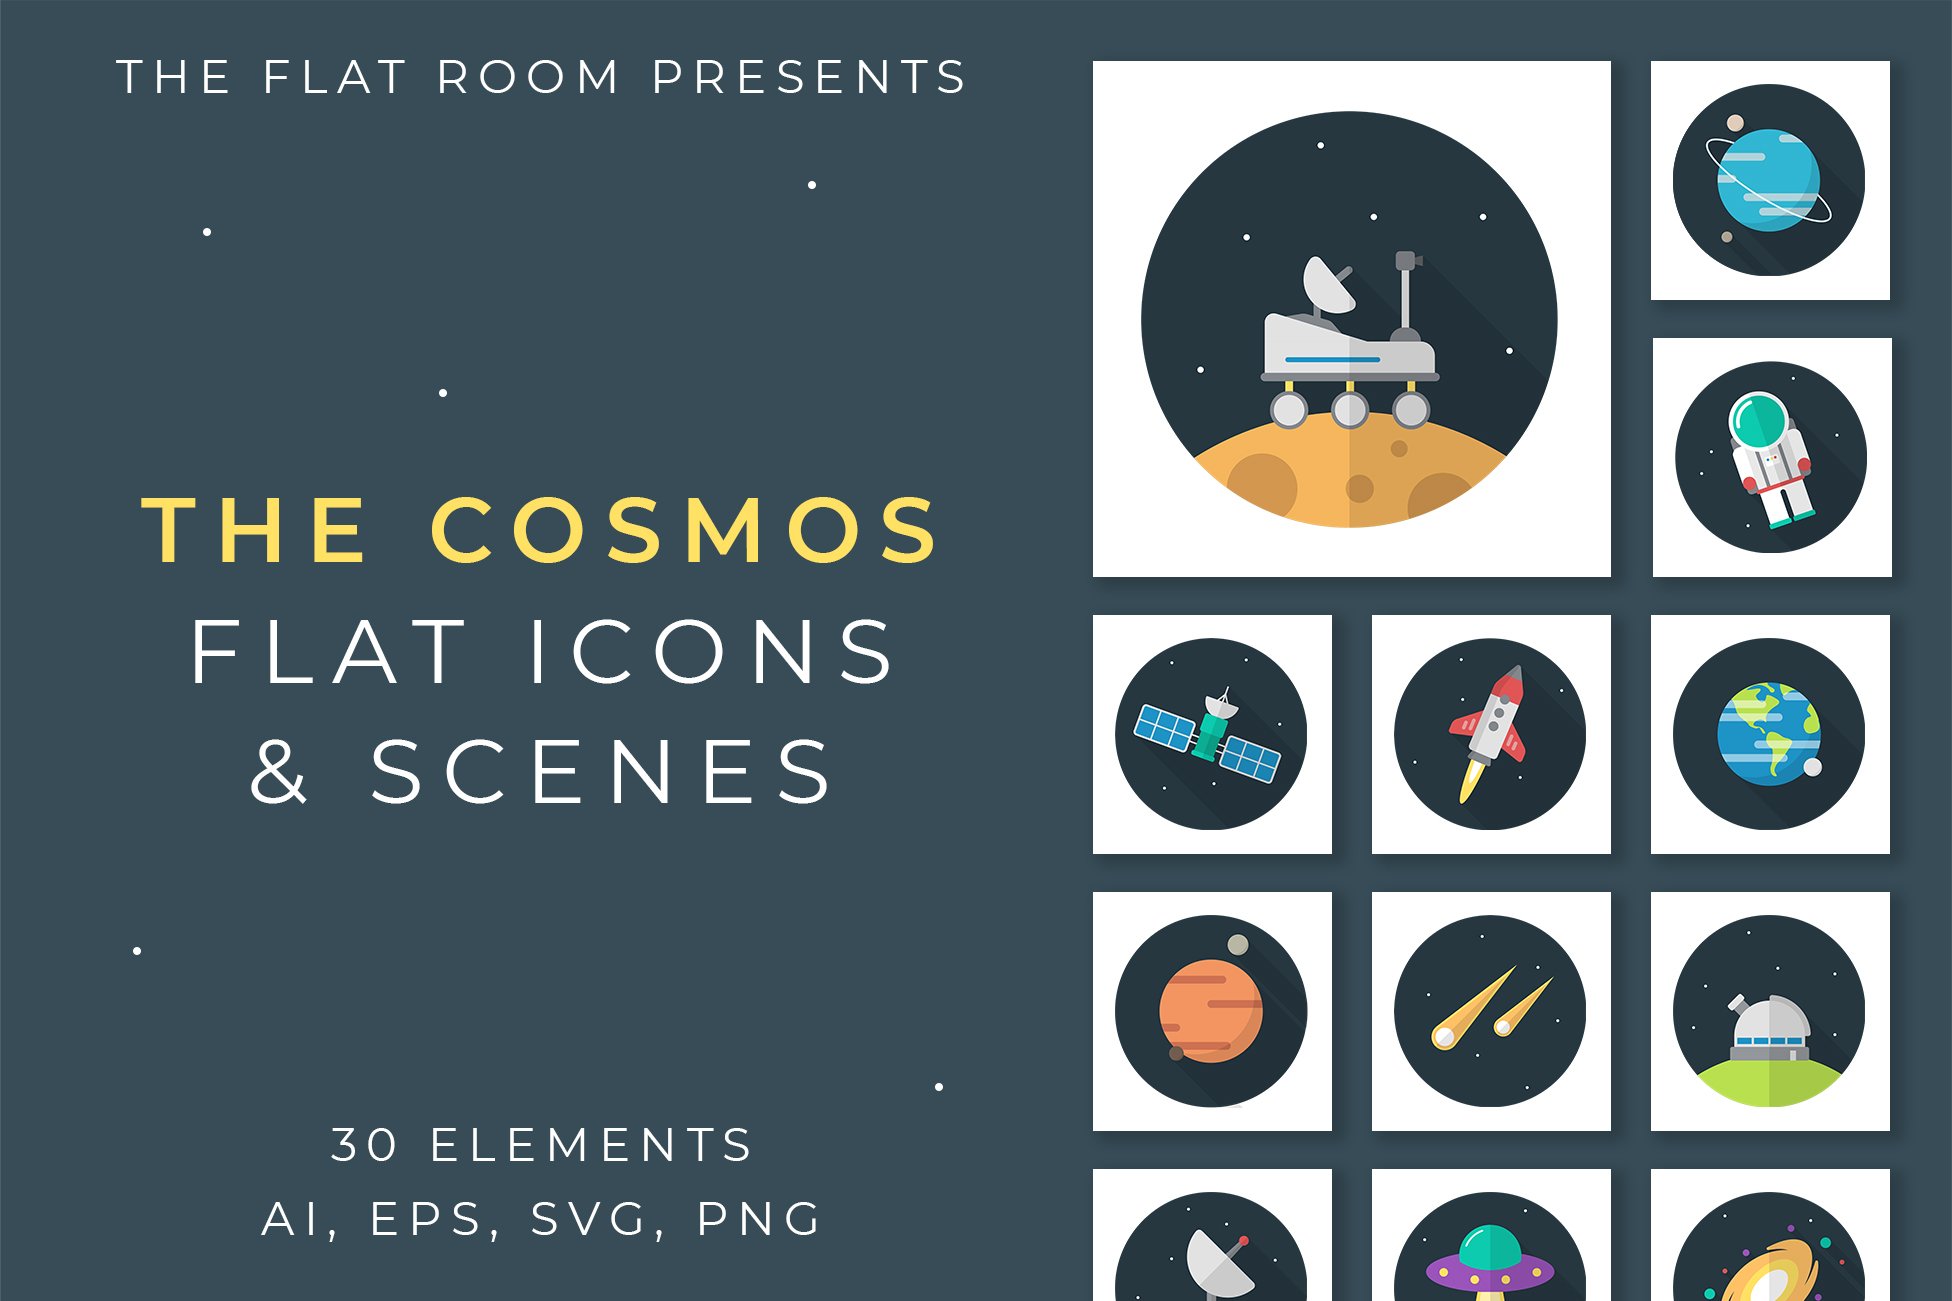 The Cosmos Flat Icon Set cover image.